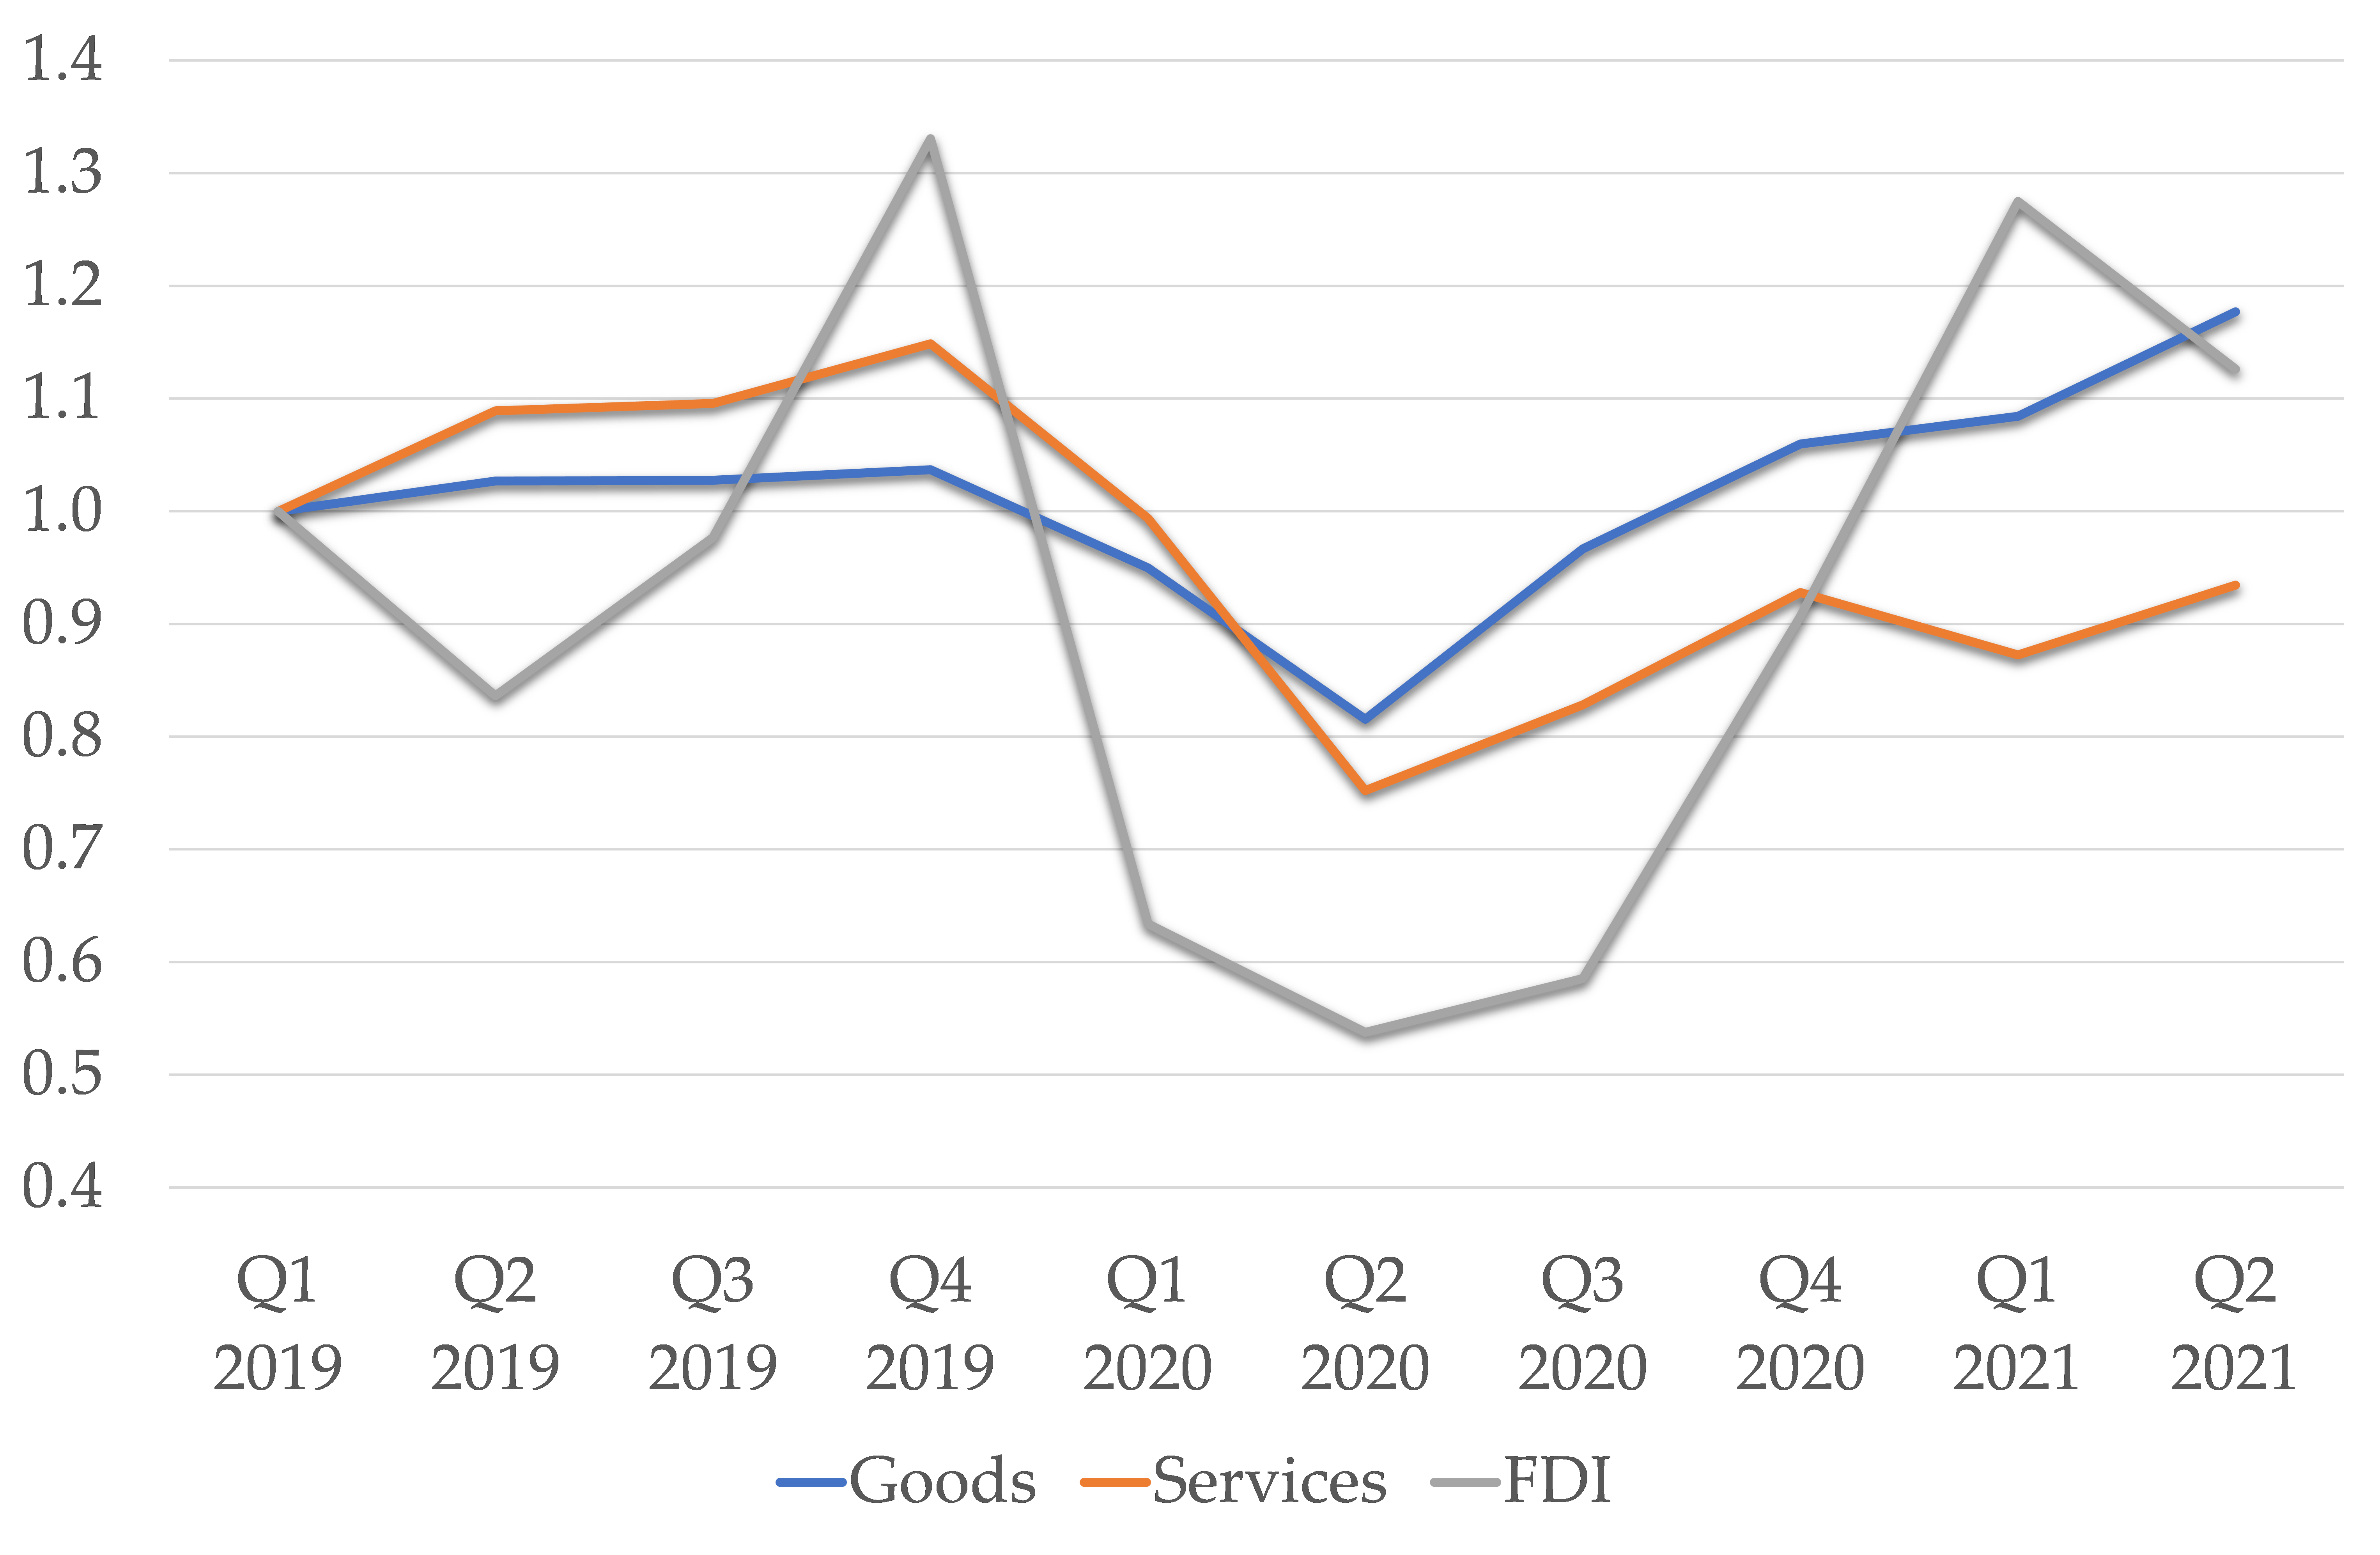 Figure. Changes in Goods Trade, Services Trade, and Investment in the World (Q1 2019 = 1)